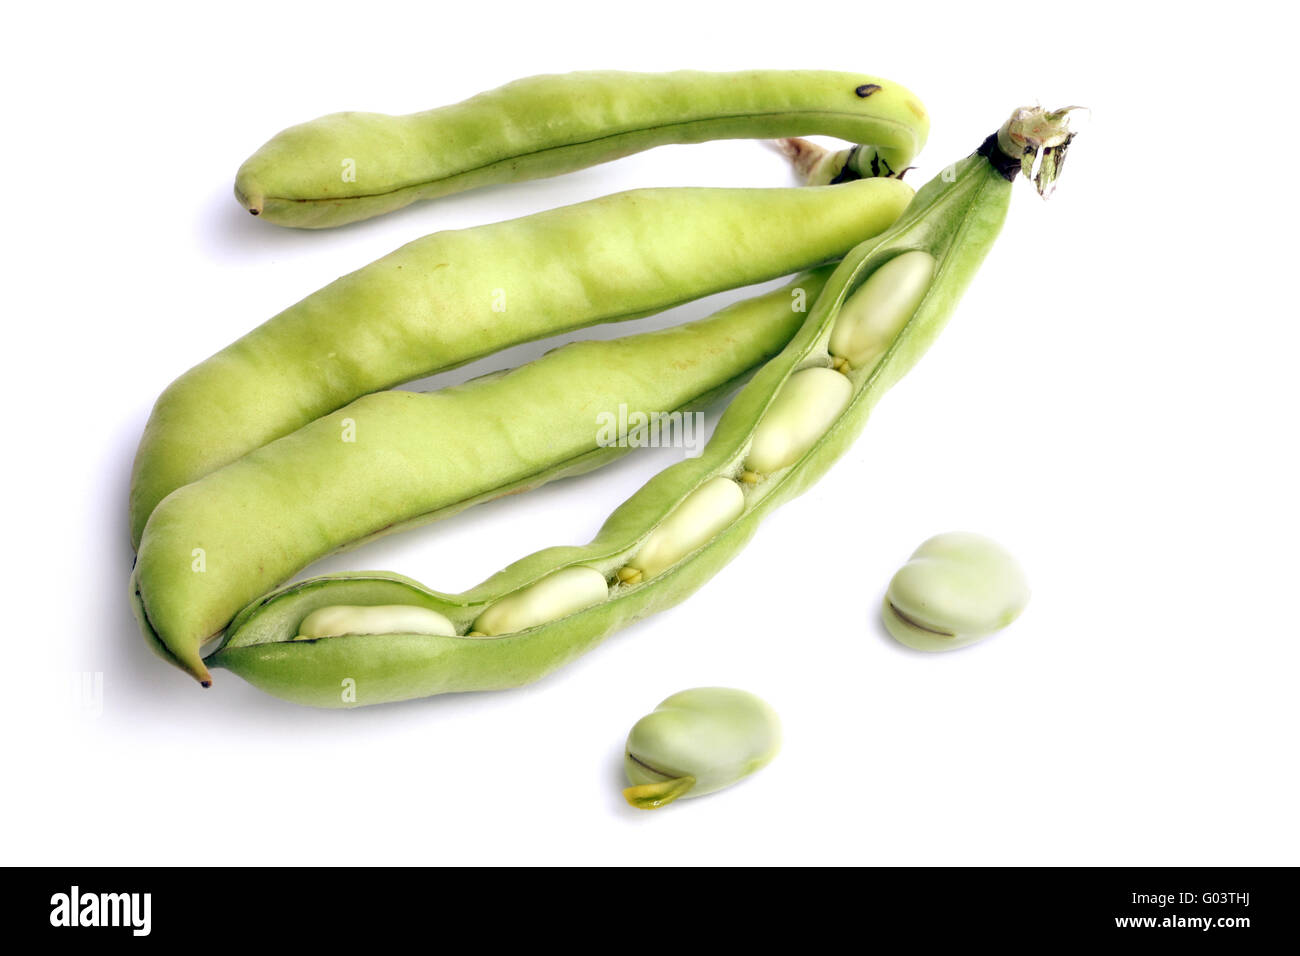 Broad bean pods and two beans Stock Photo